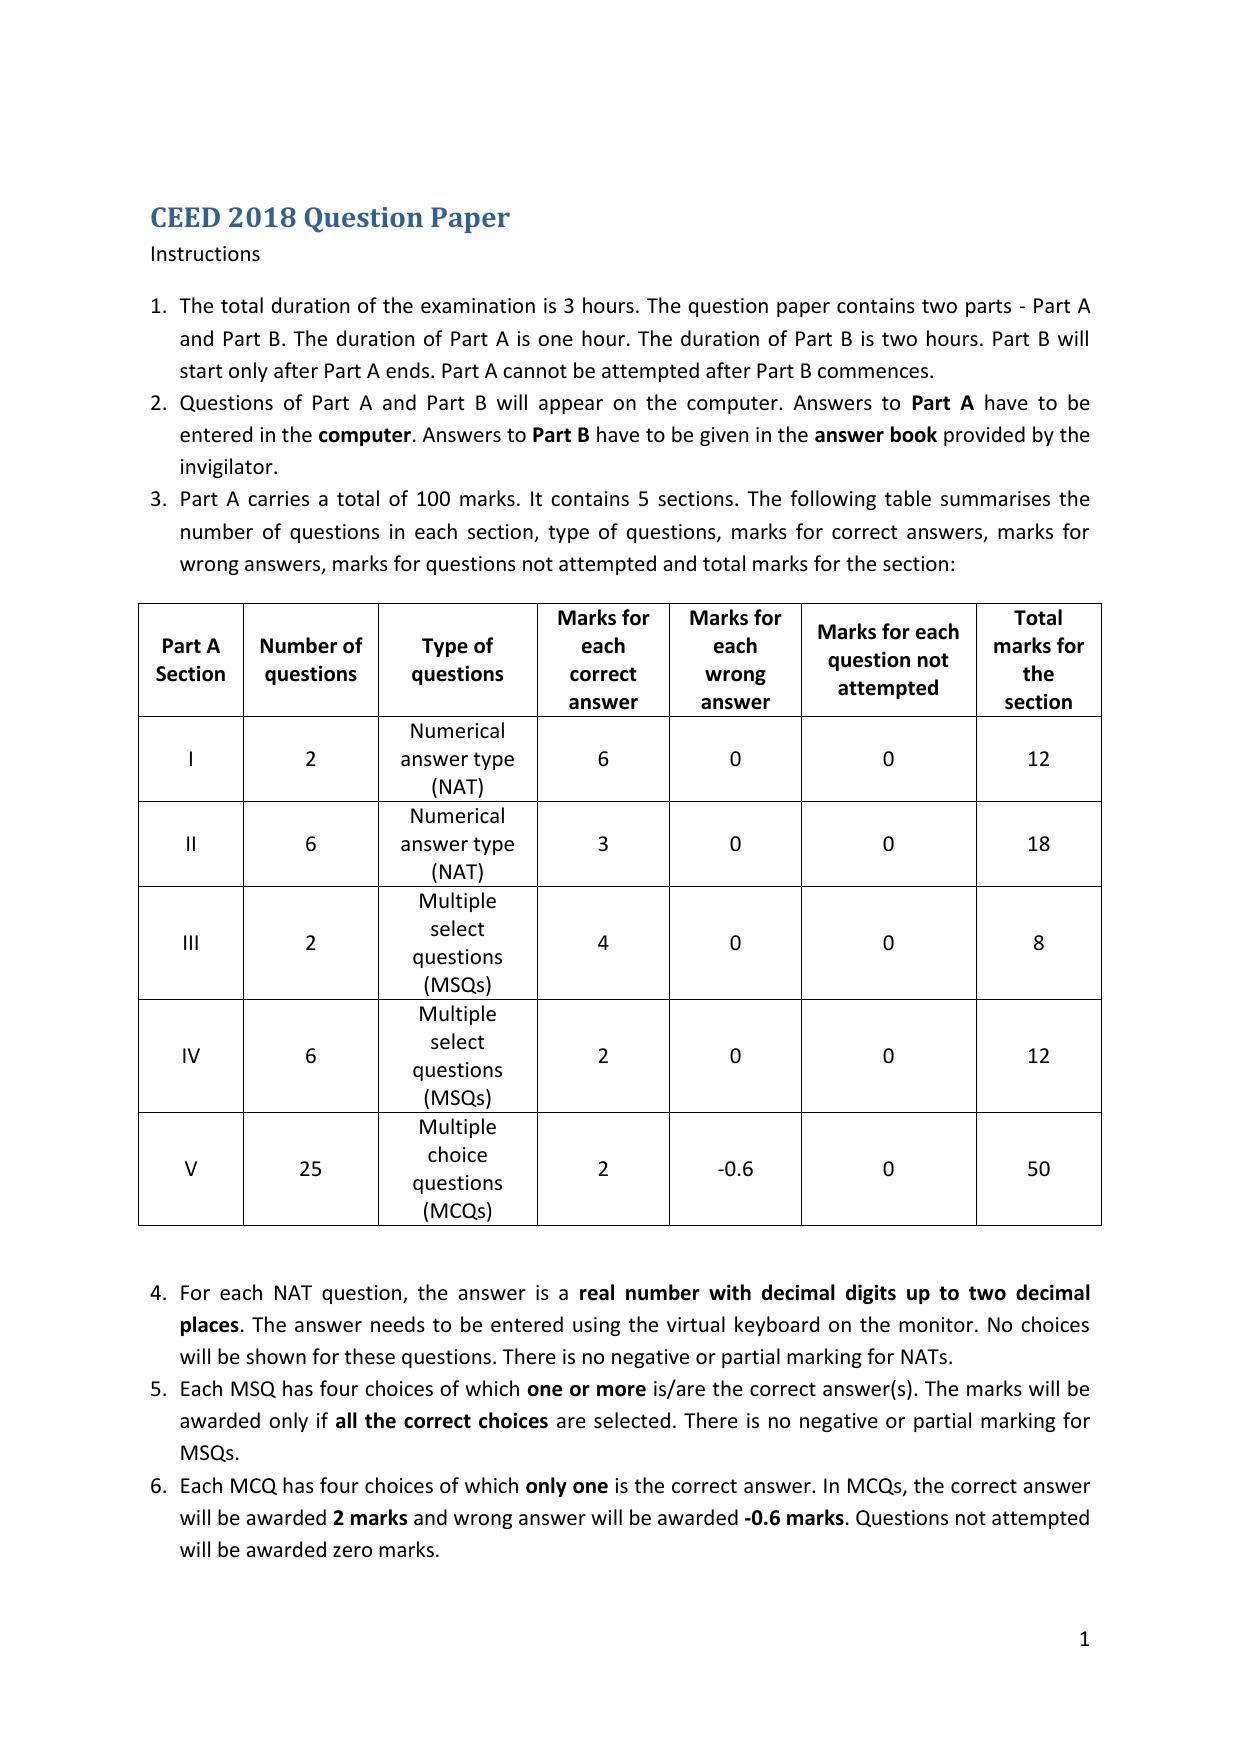 CEED 2018 Question Paper - Page 2